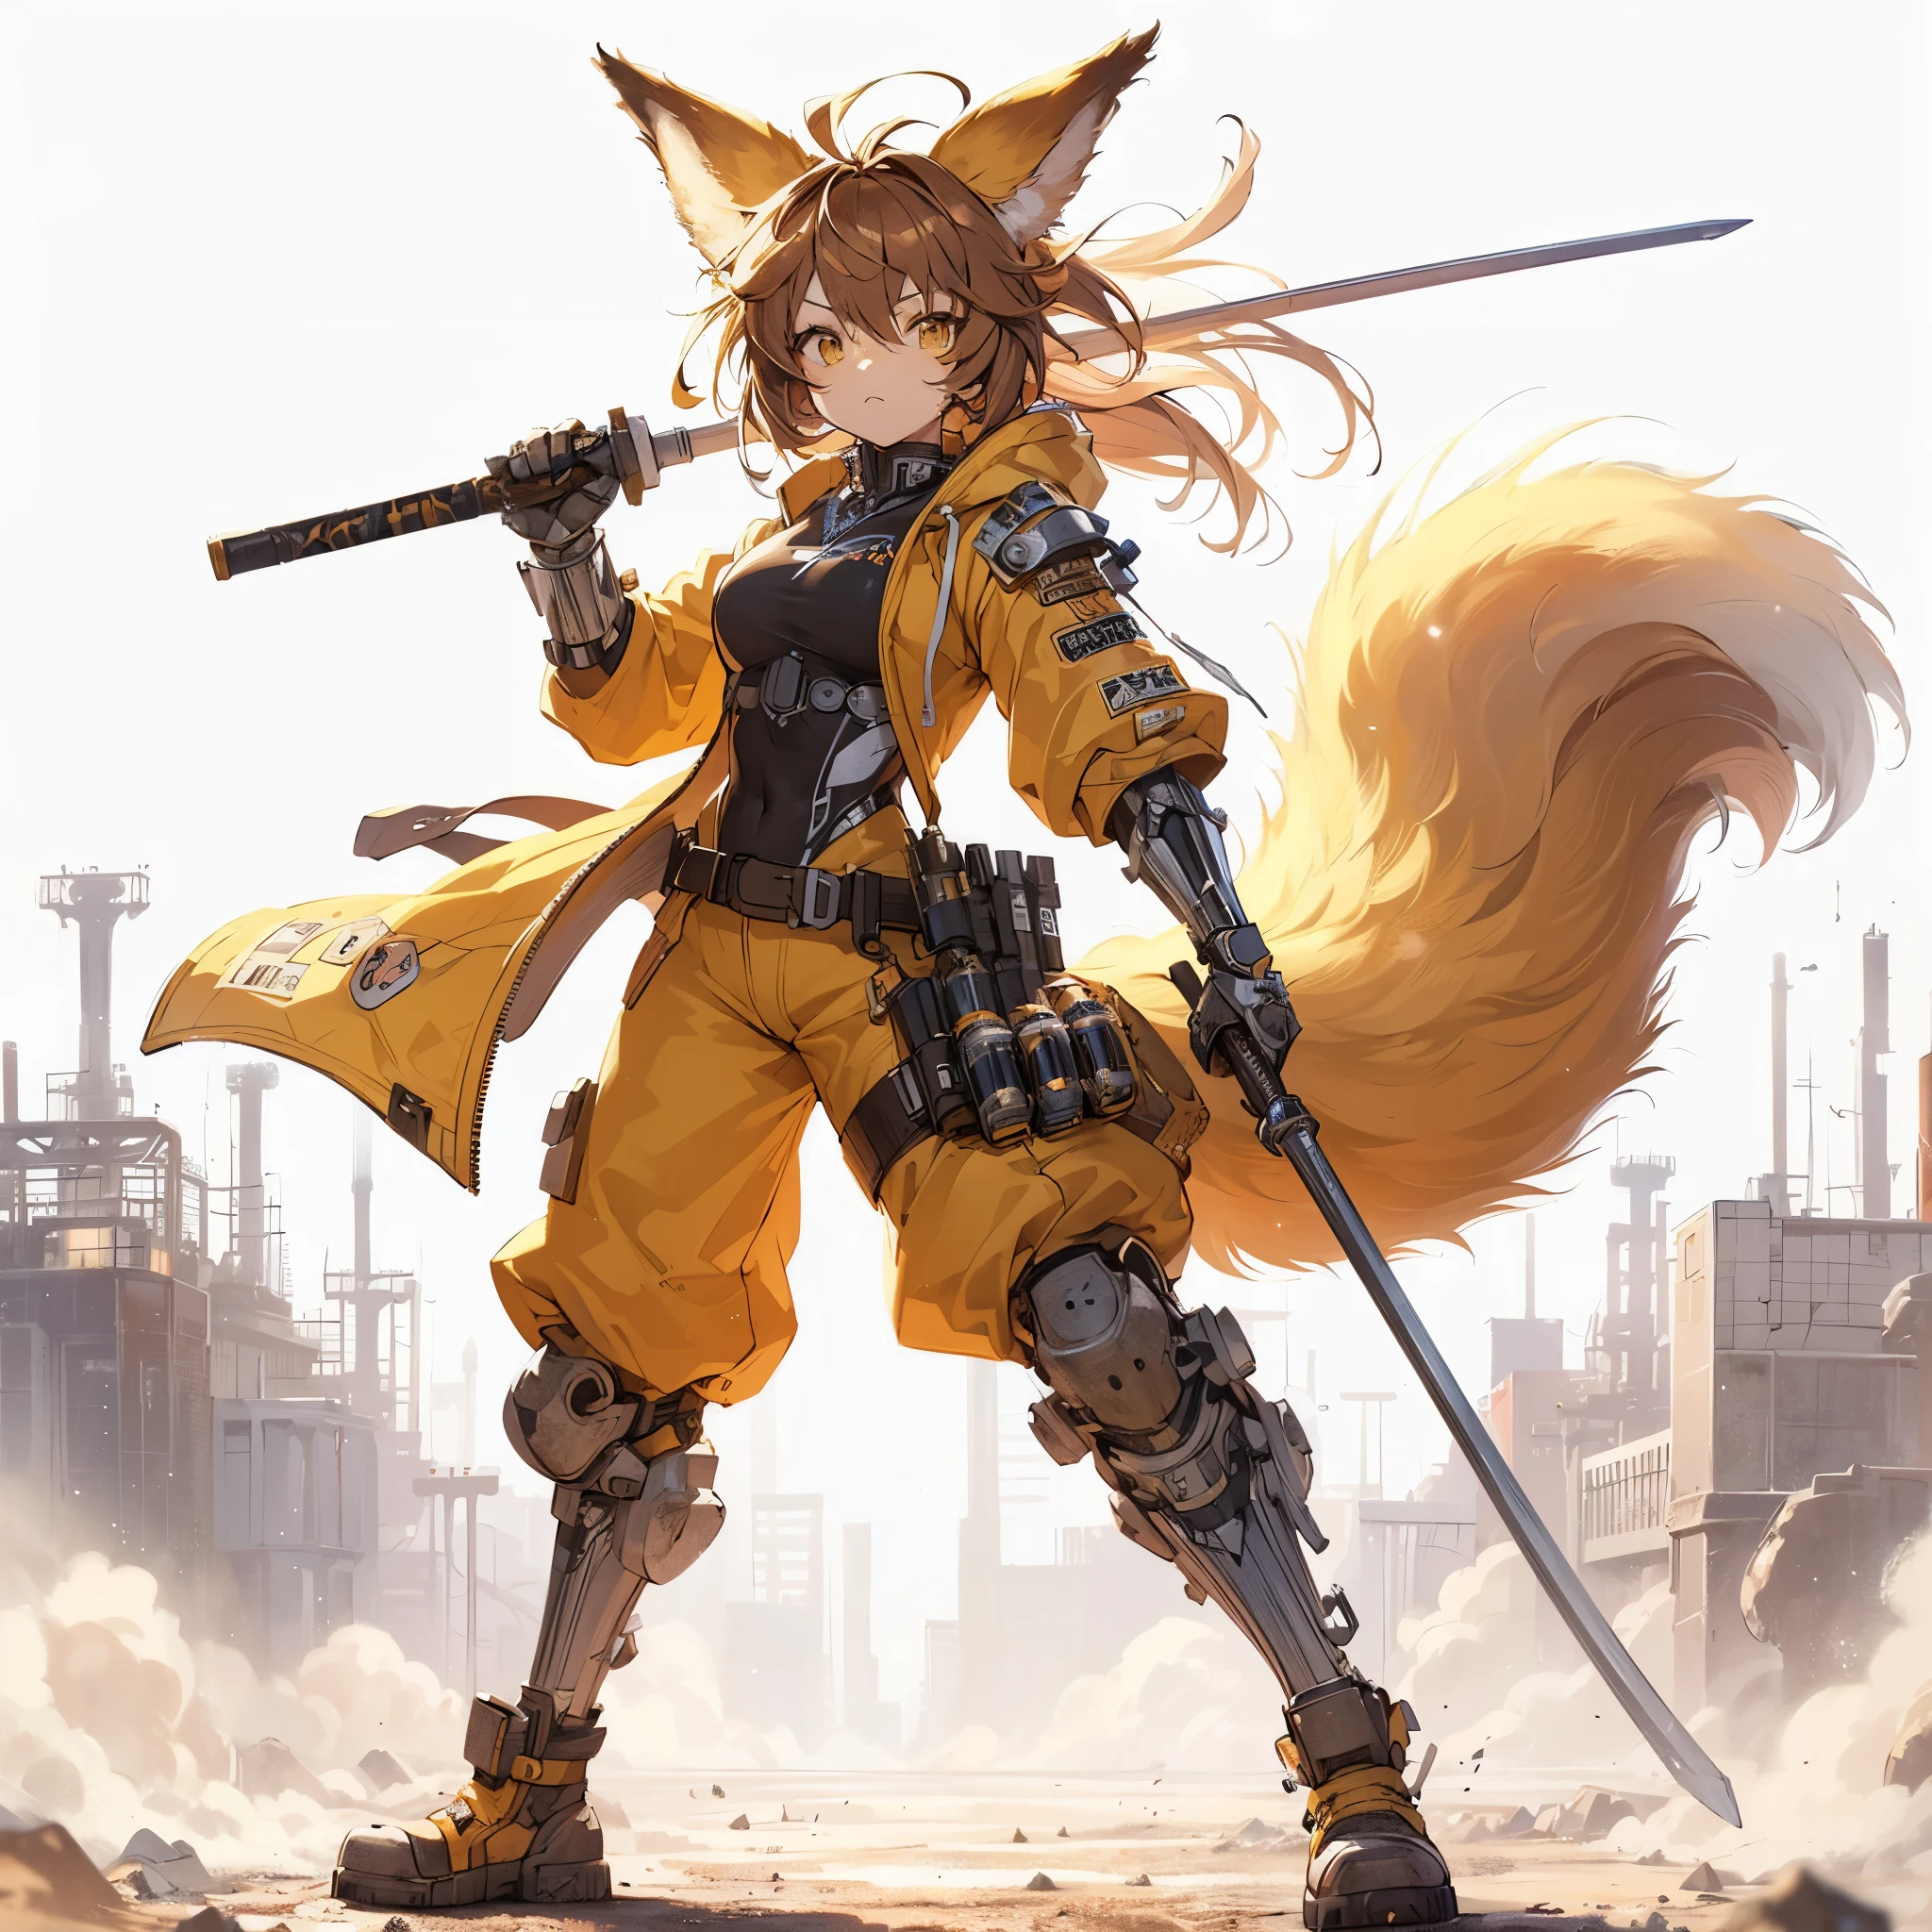 (Masterpiece, best quality), (perfect athlete body:1.2), (detailed hair), ultra-detailed, anime style, solo, full body, Furry animal girl alchemist, brown hair, yellow fur, wears cyberpunk KARATE wear, has High-tech stick weapons, raised boots, digital painting, 8k high resolution, whole body, white background, standing in wasteland